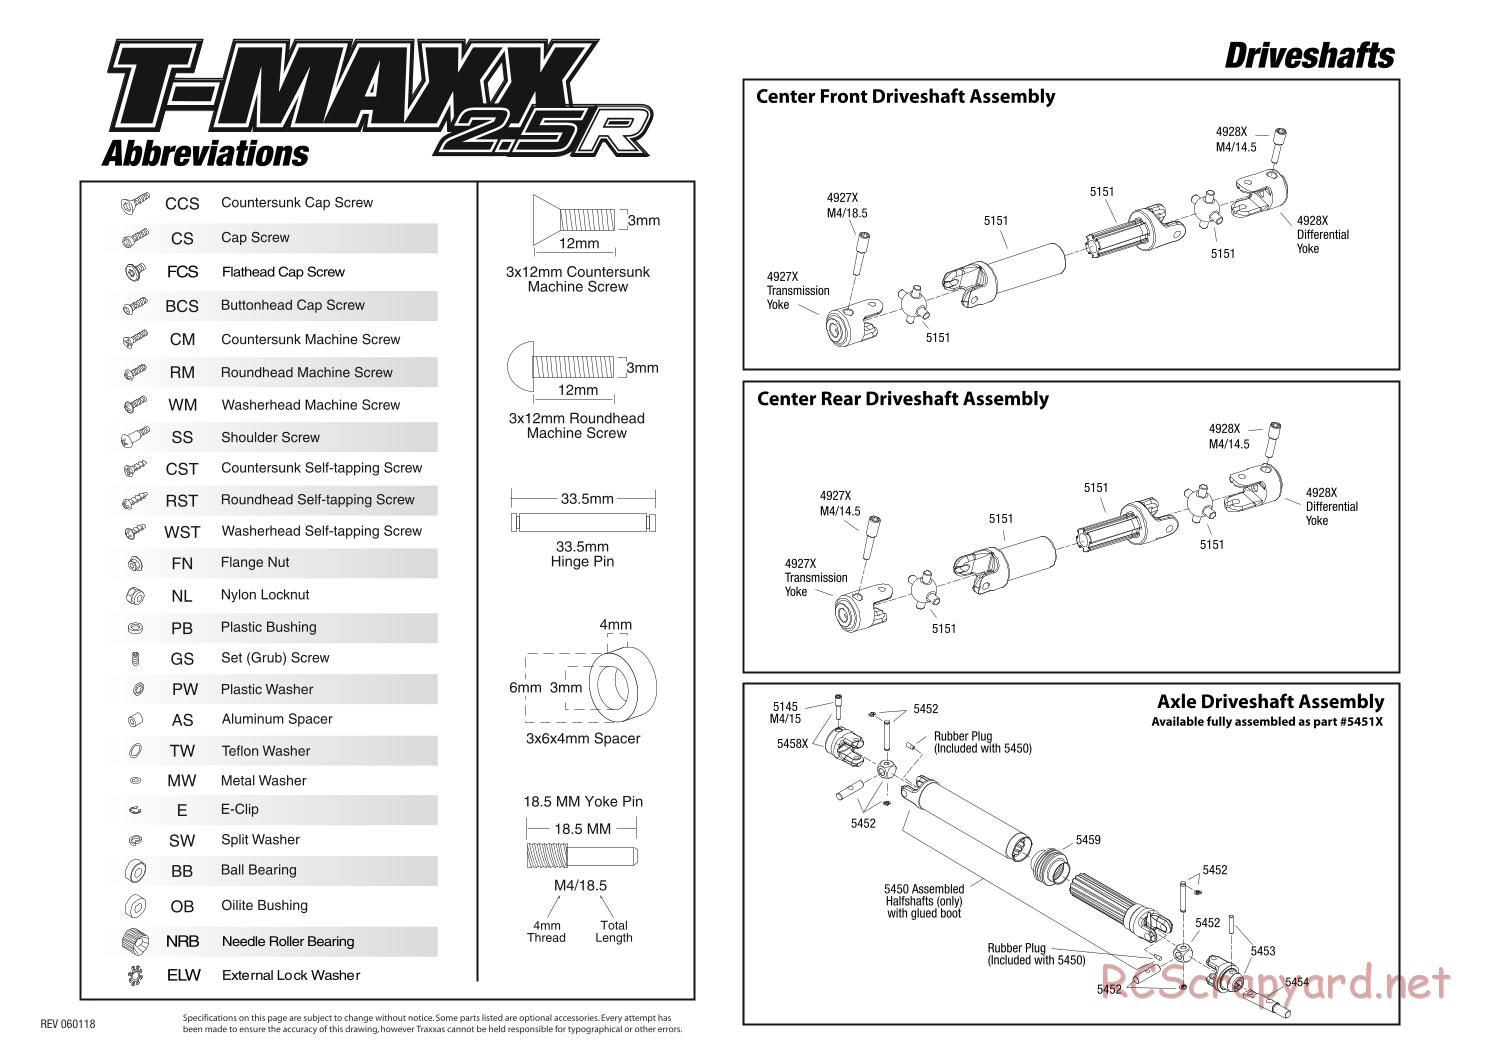 Traxxas - T-Maxx 2.5R (2006) - Exploded Views - Page 2